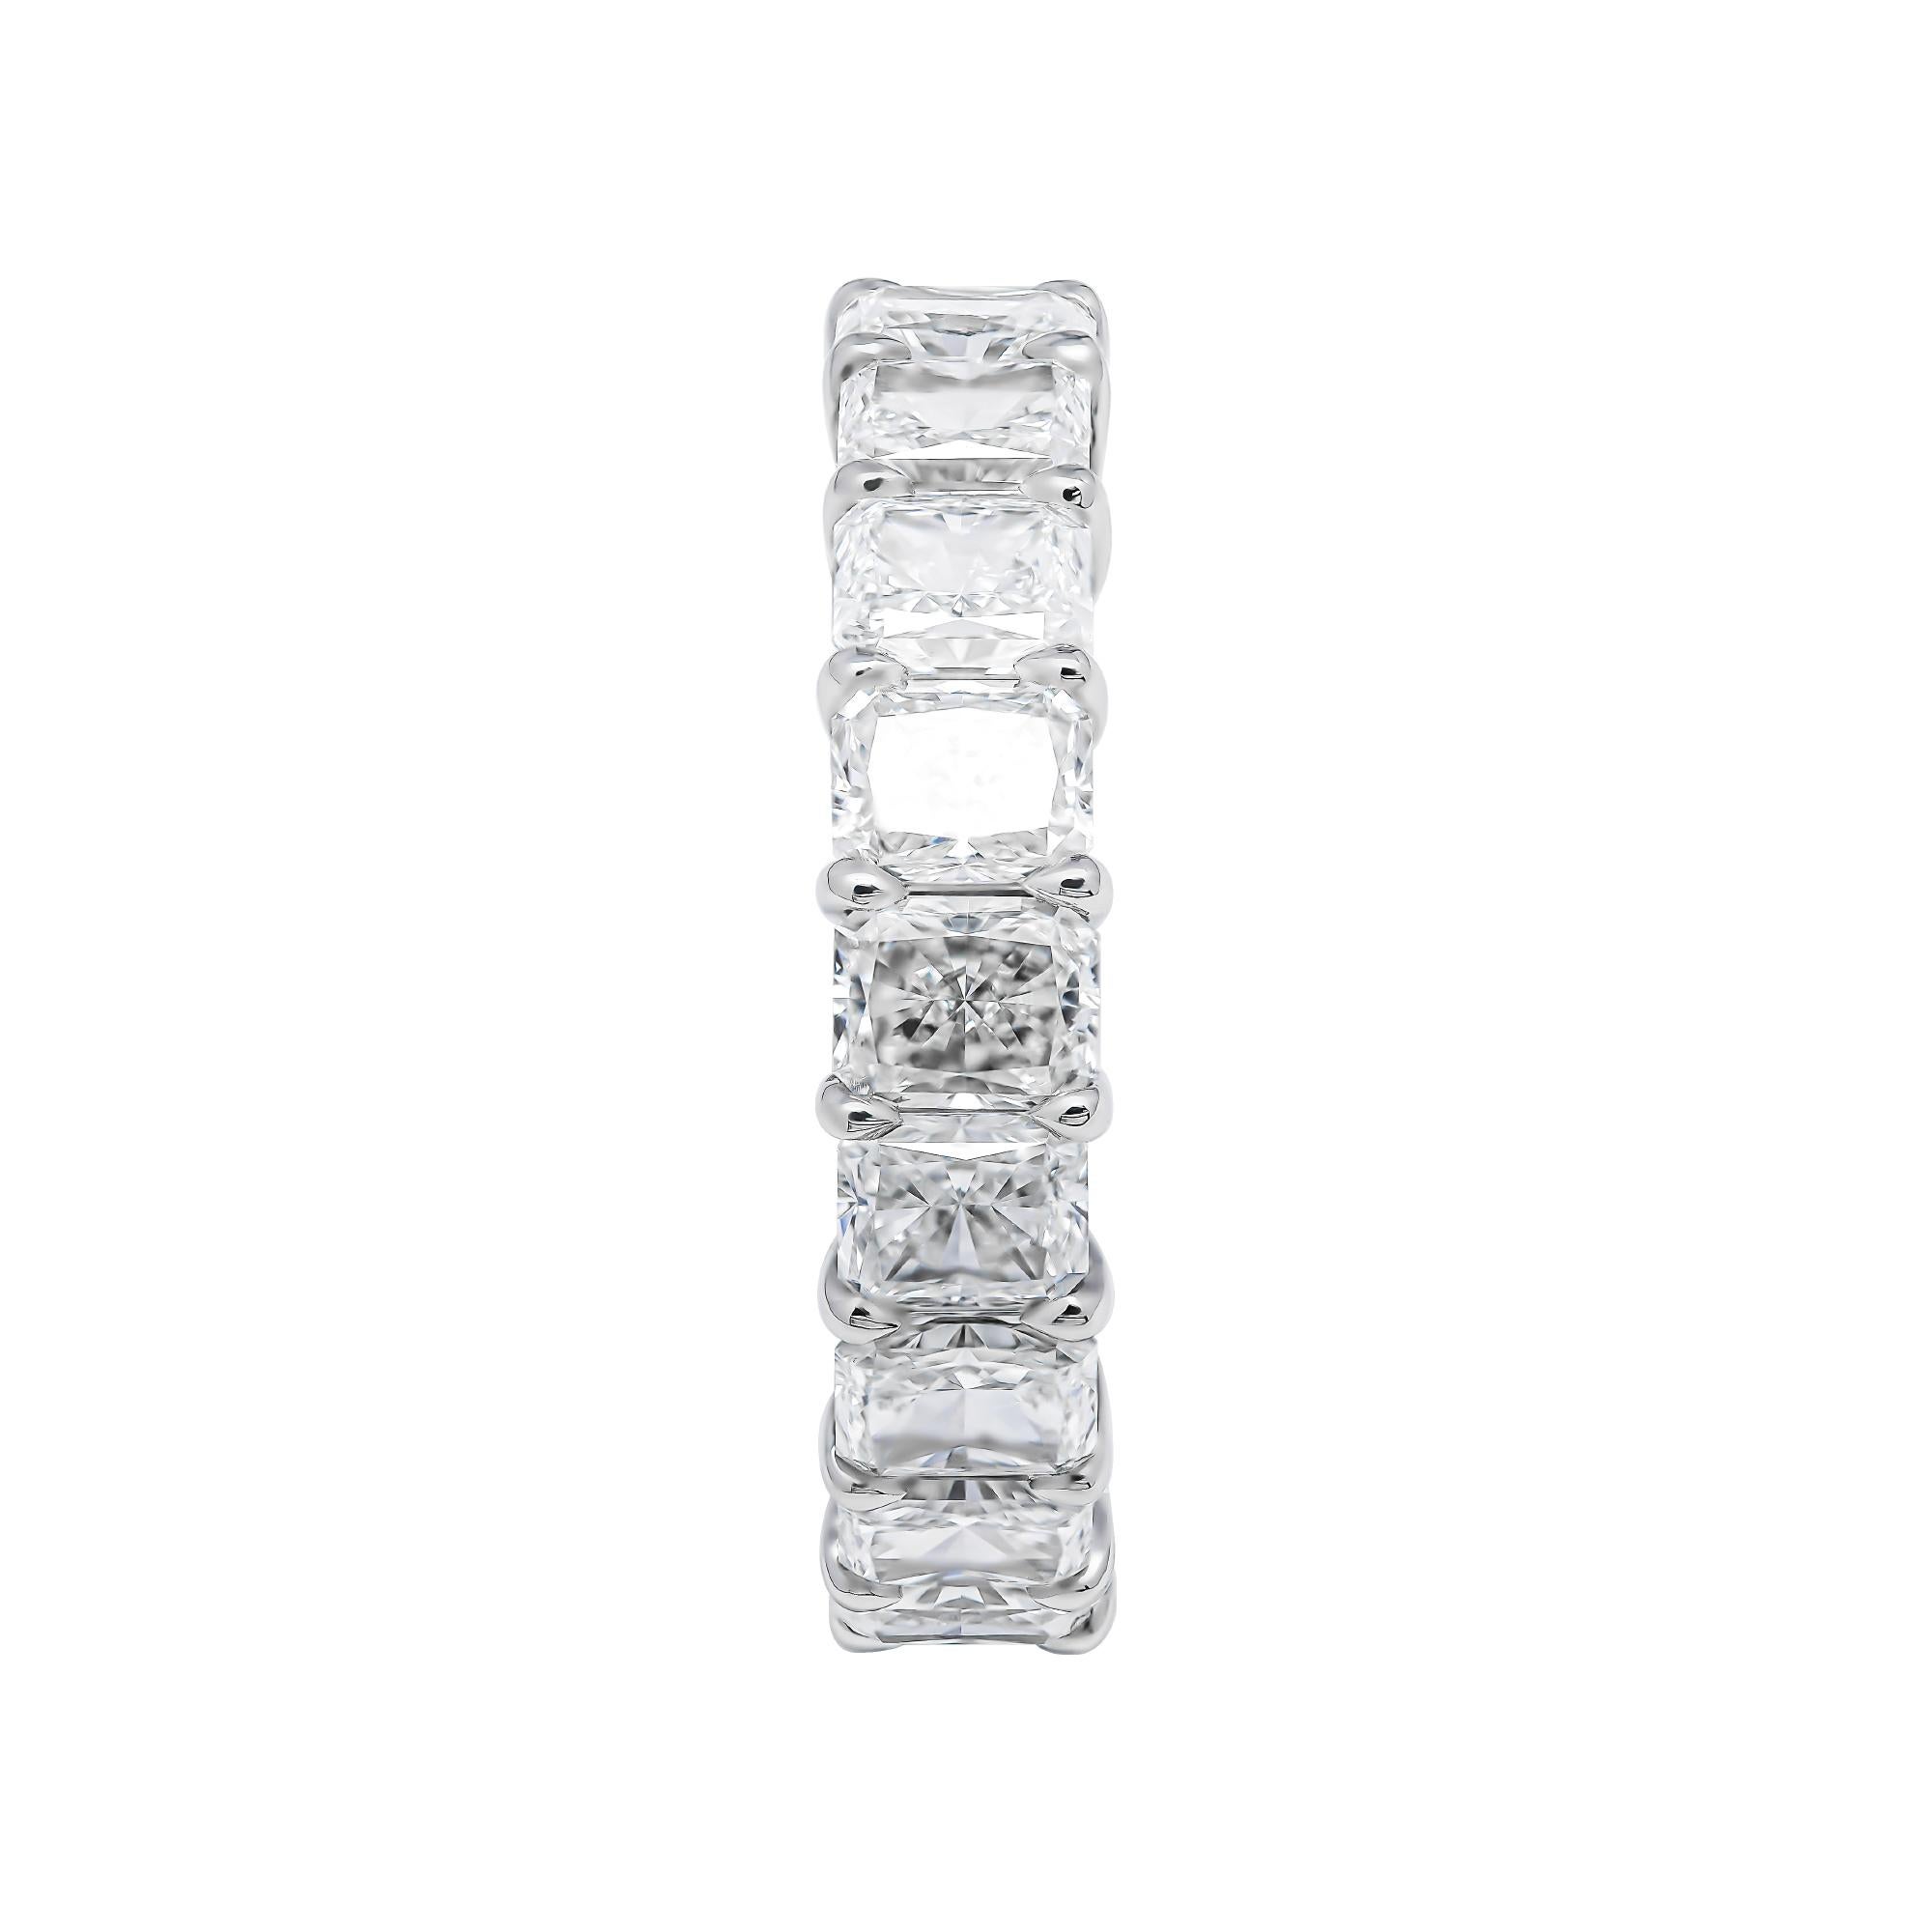 Eternity GIA 5.81ct Radiant Cut Diamond Prong Set WEDDING ANNIVERSARY Platinum Band Ring

GORGEOUS ETERNITY Platinum Band with Radiant cut Diamonds!!! Classy and beautiful, a perfect compliment to an engagement ring. Can also be worn by itself, as